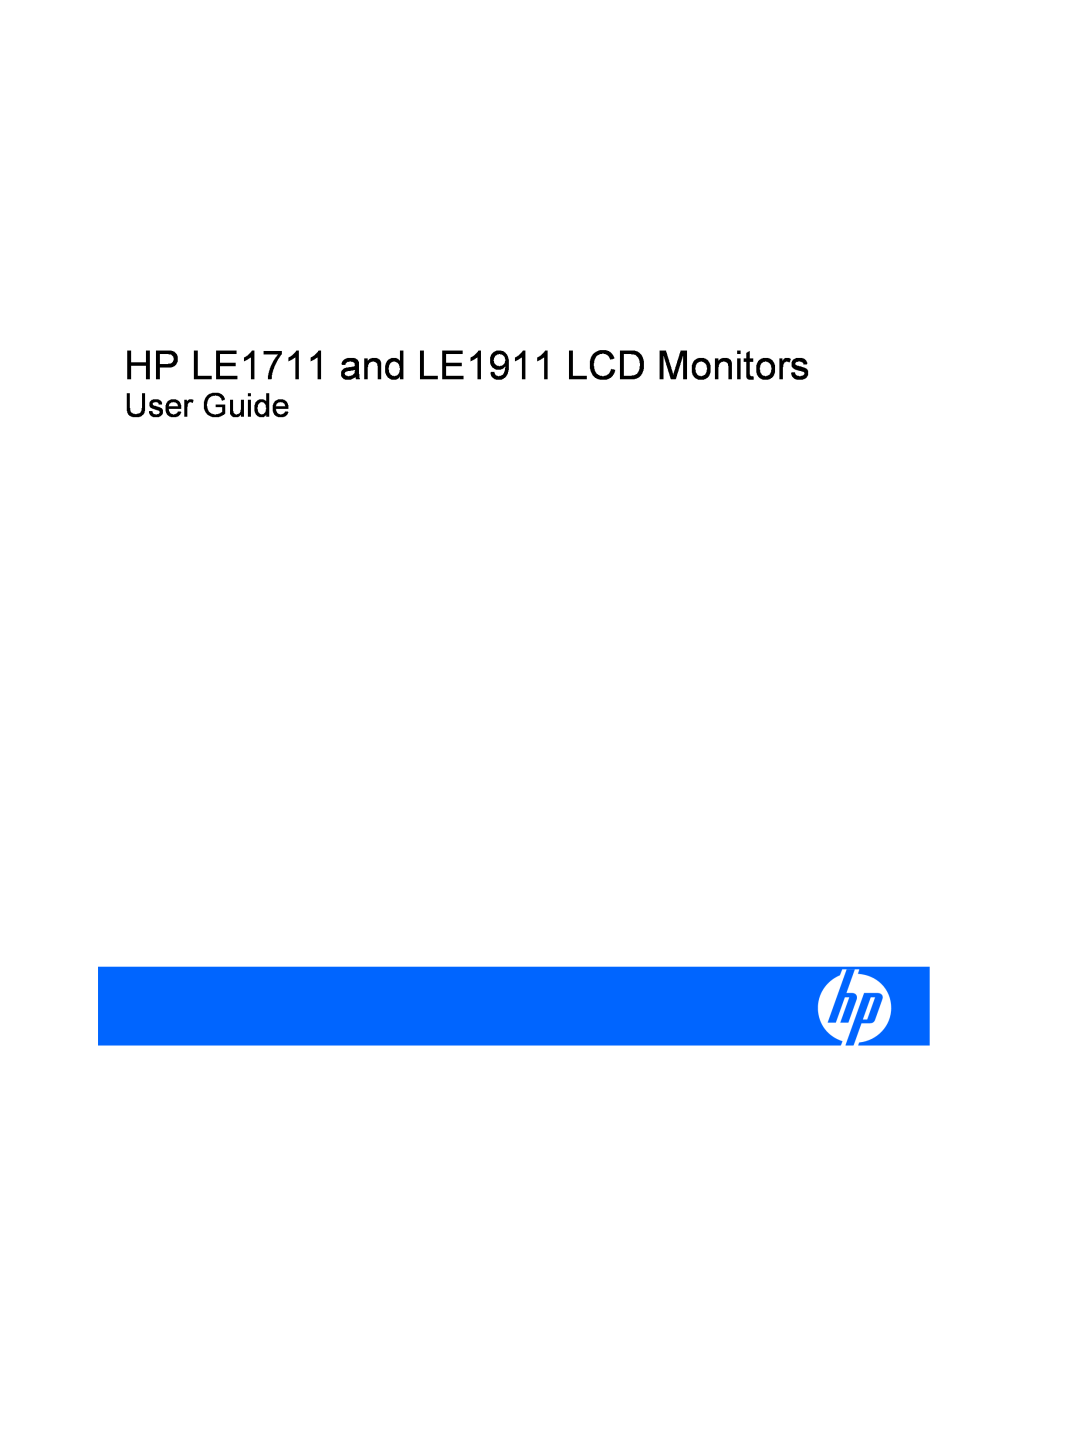 HP LE1711 17-inch manual HP LE1711 and LE1911 LCD Monitors, User Guide 